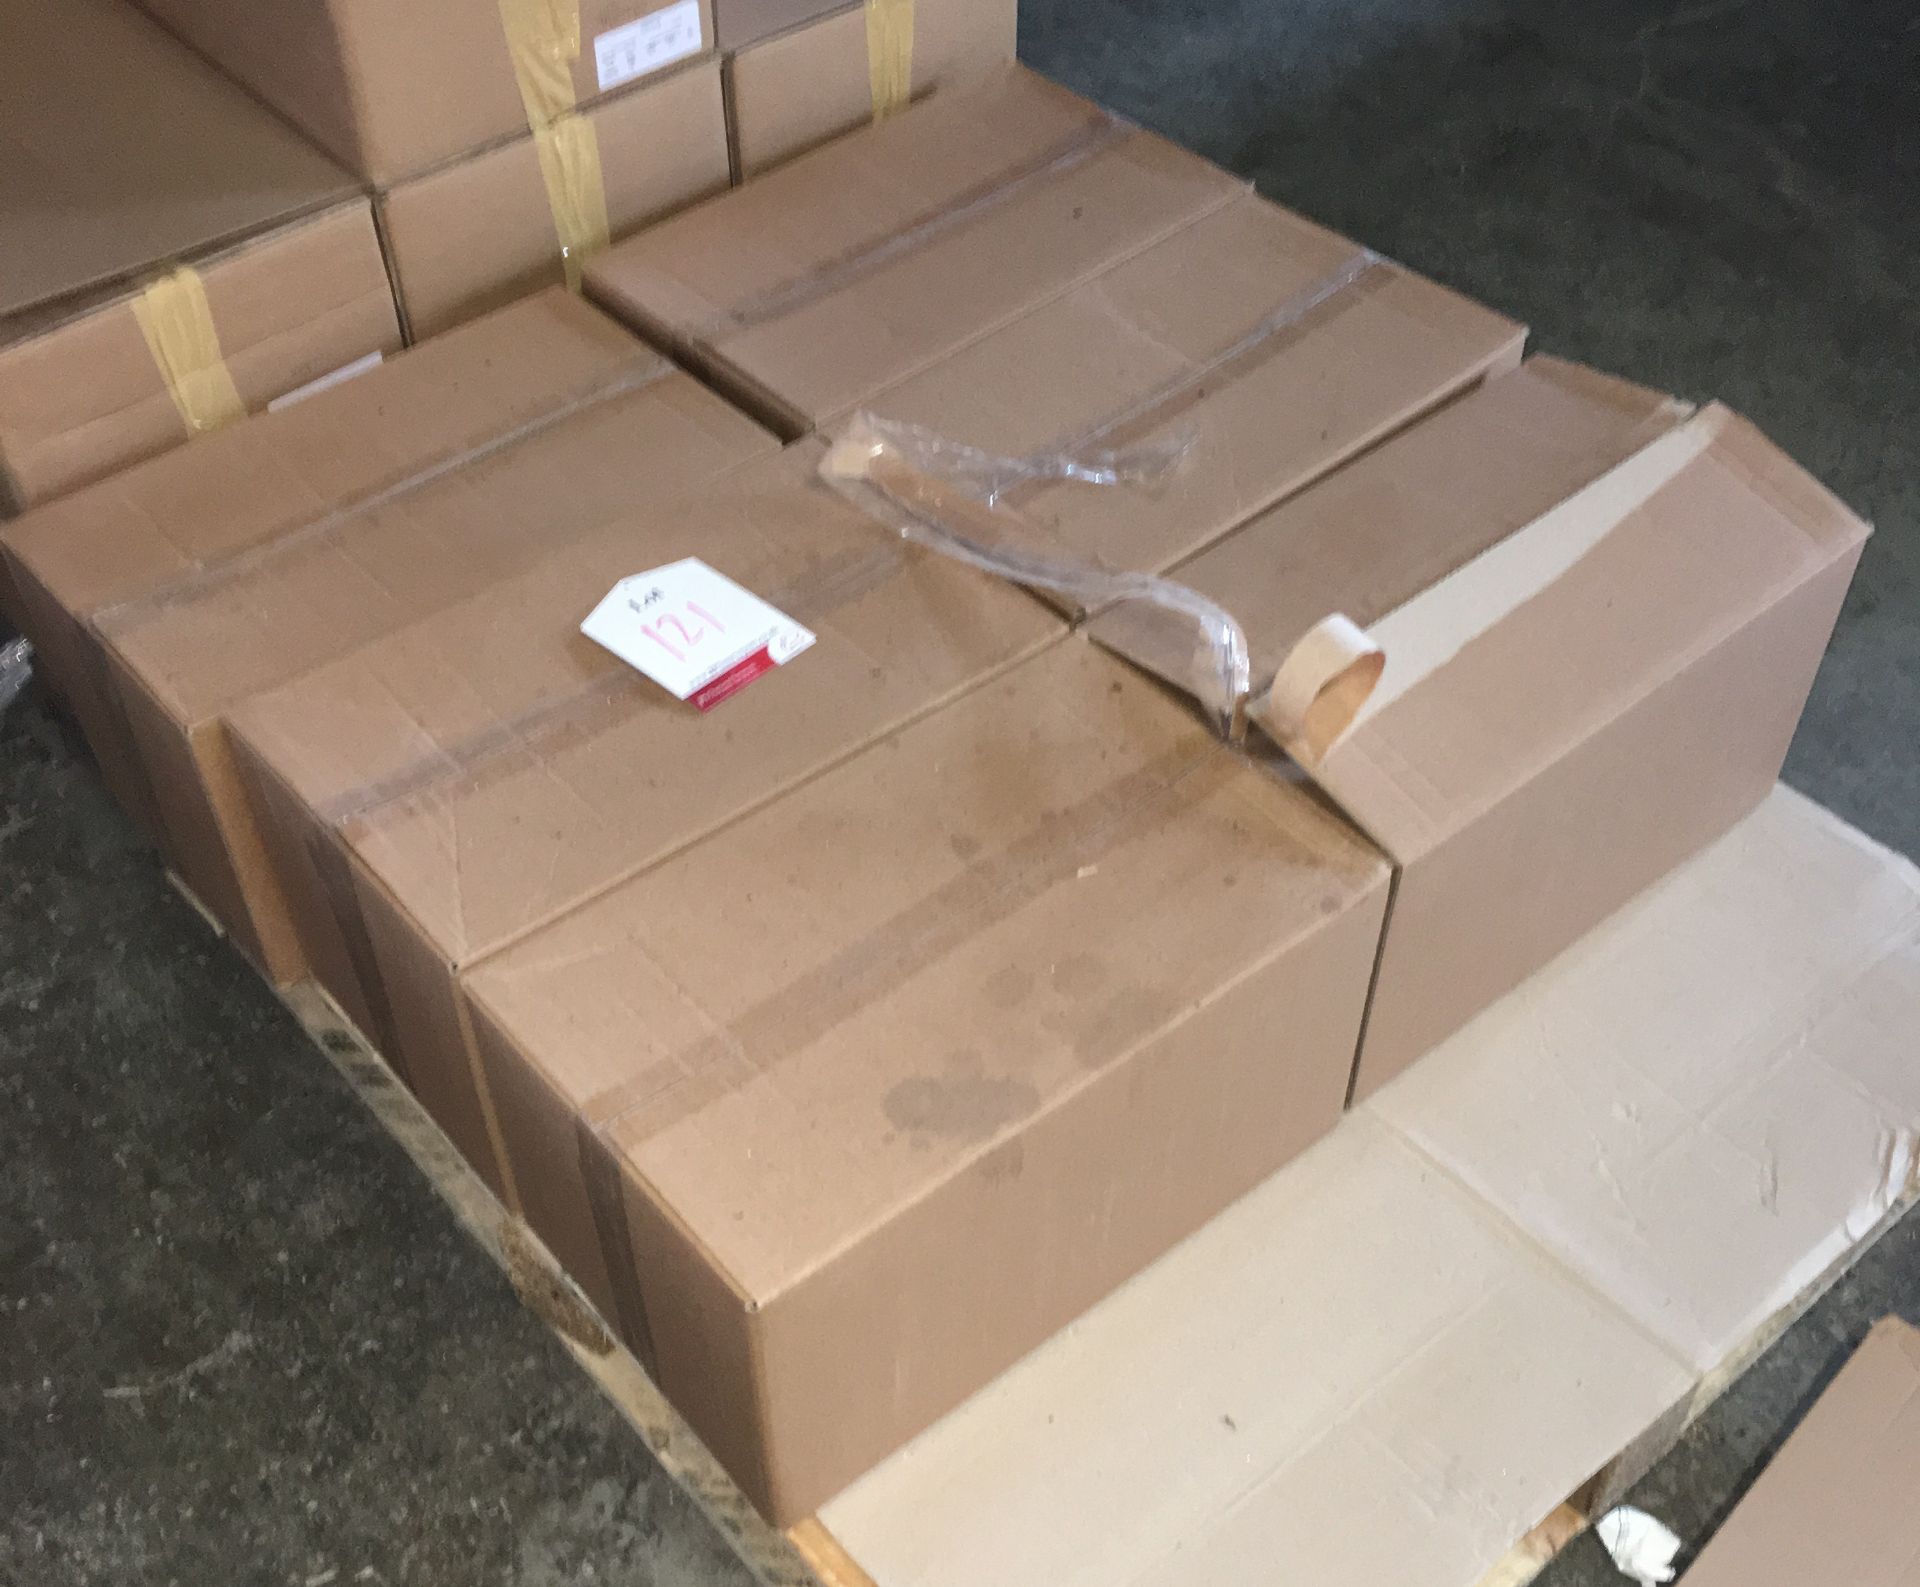 6 x Boxes of Sterling Plastic Packaging Bags - 2100 per Box